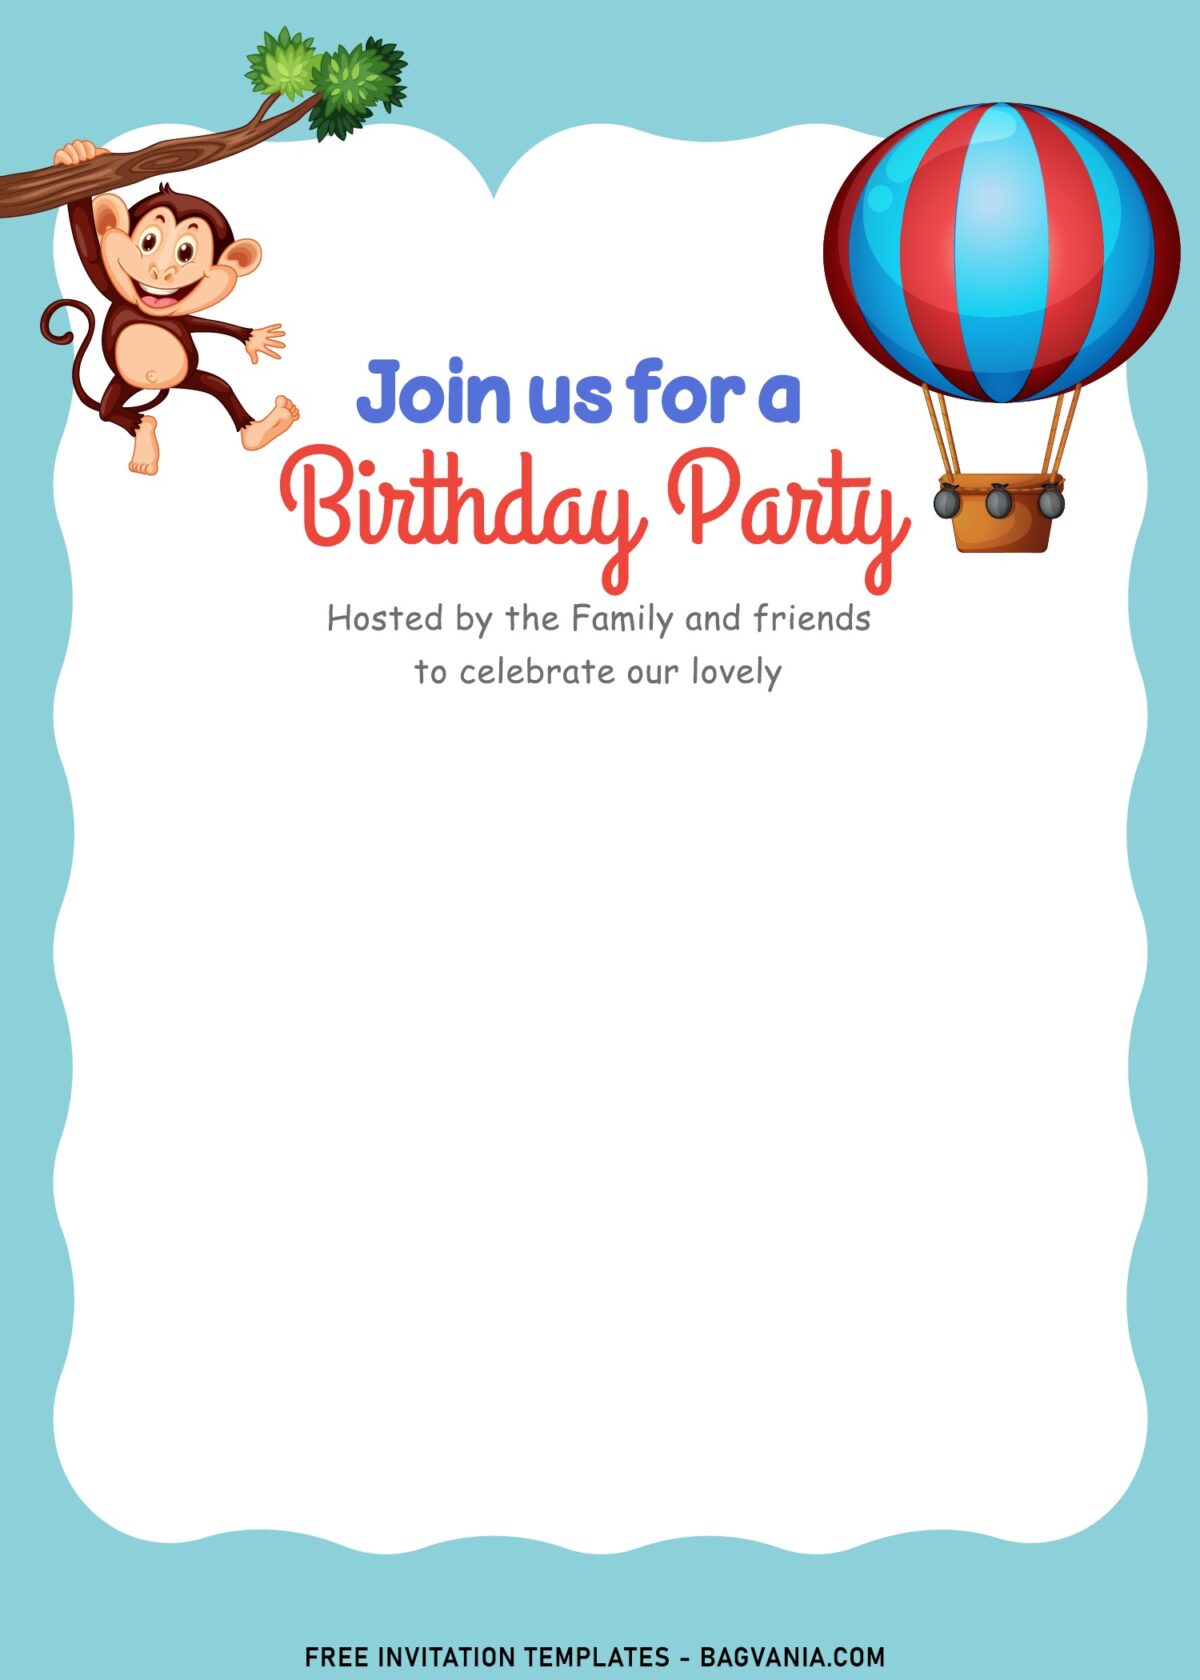 10+ Best And Cute Birthday Invitation Templates For Preschooler with hot air balloon